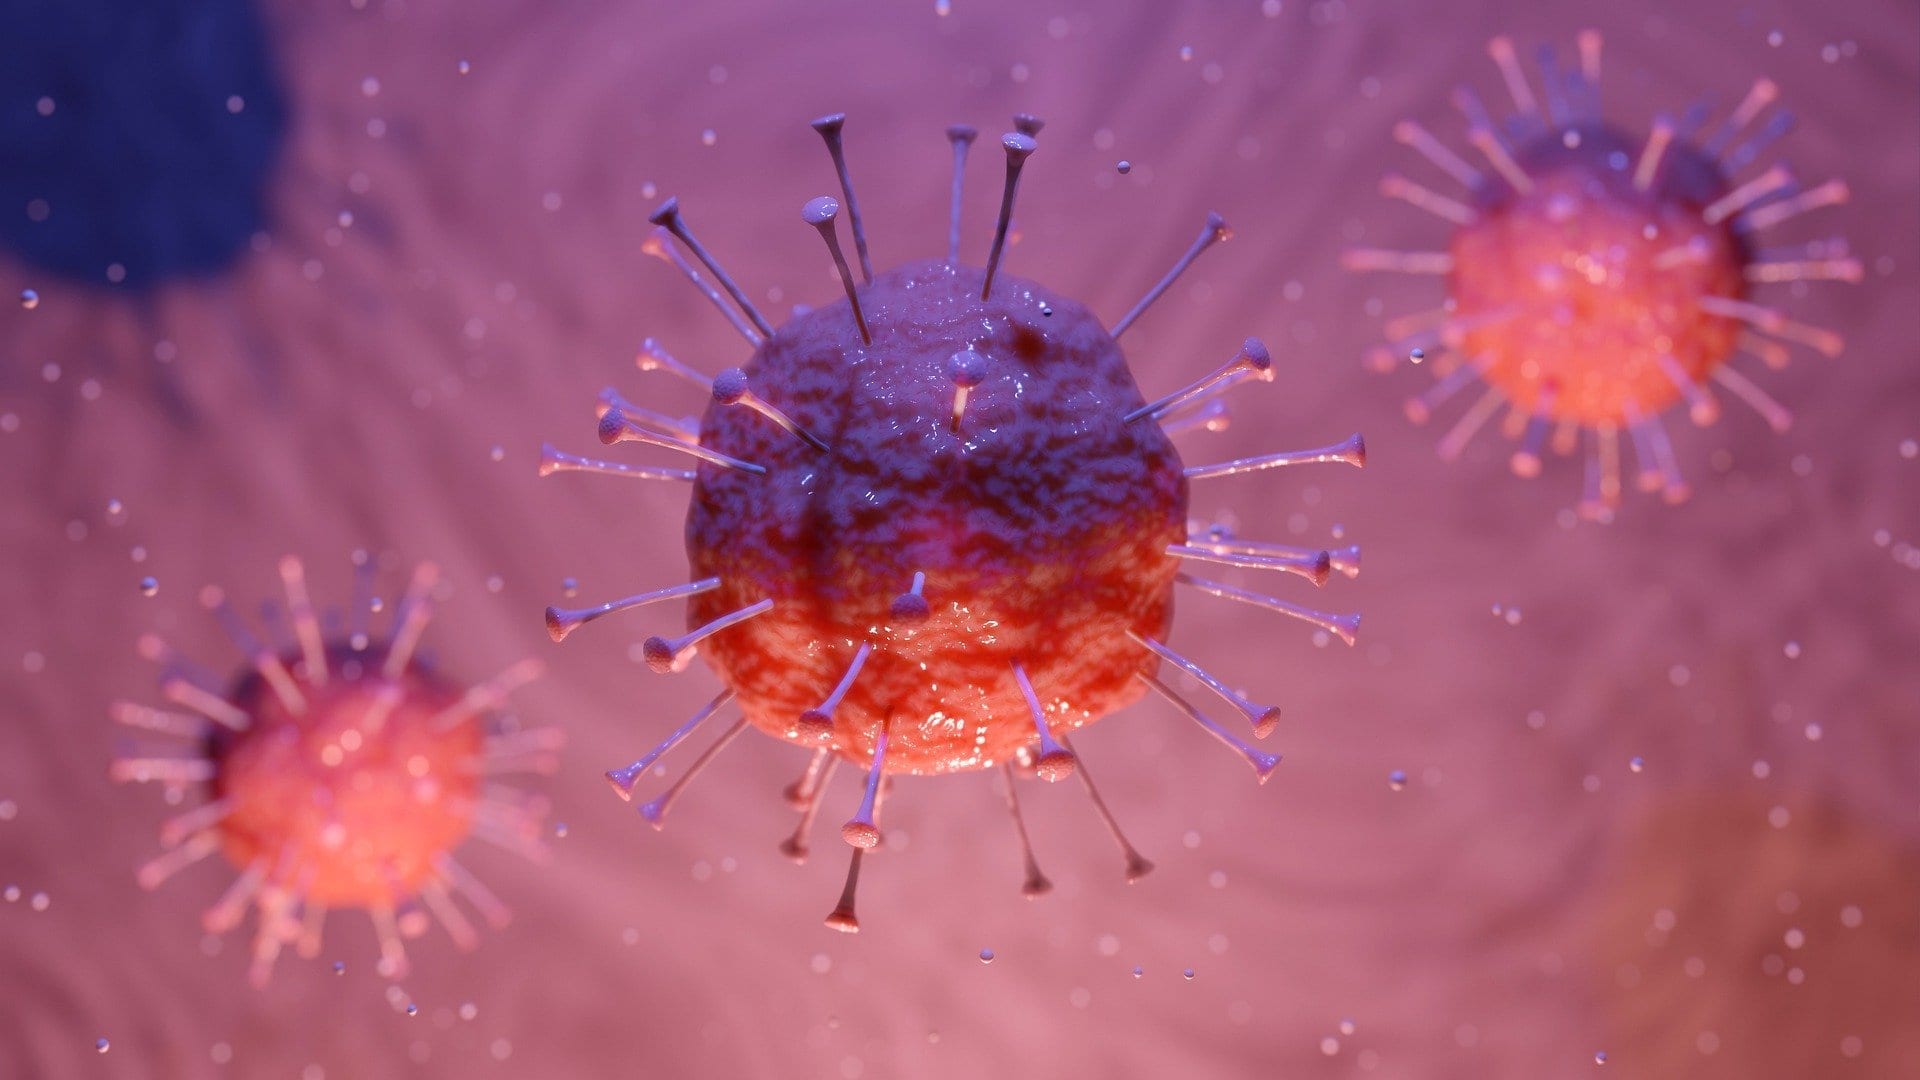 a round spiky orb, or close up the coronavirus